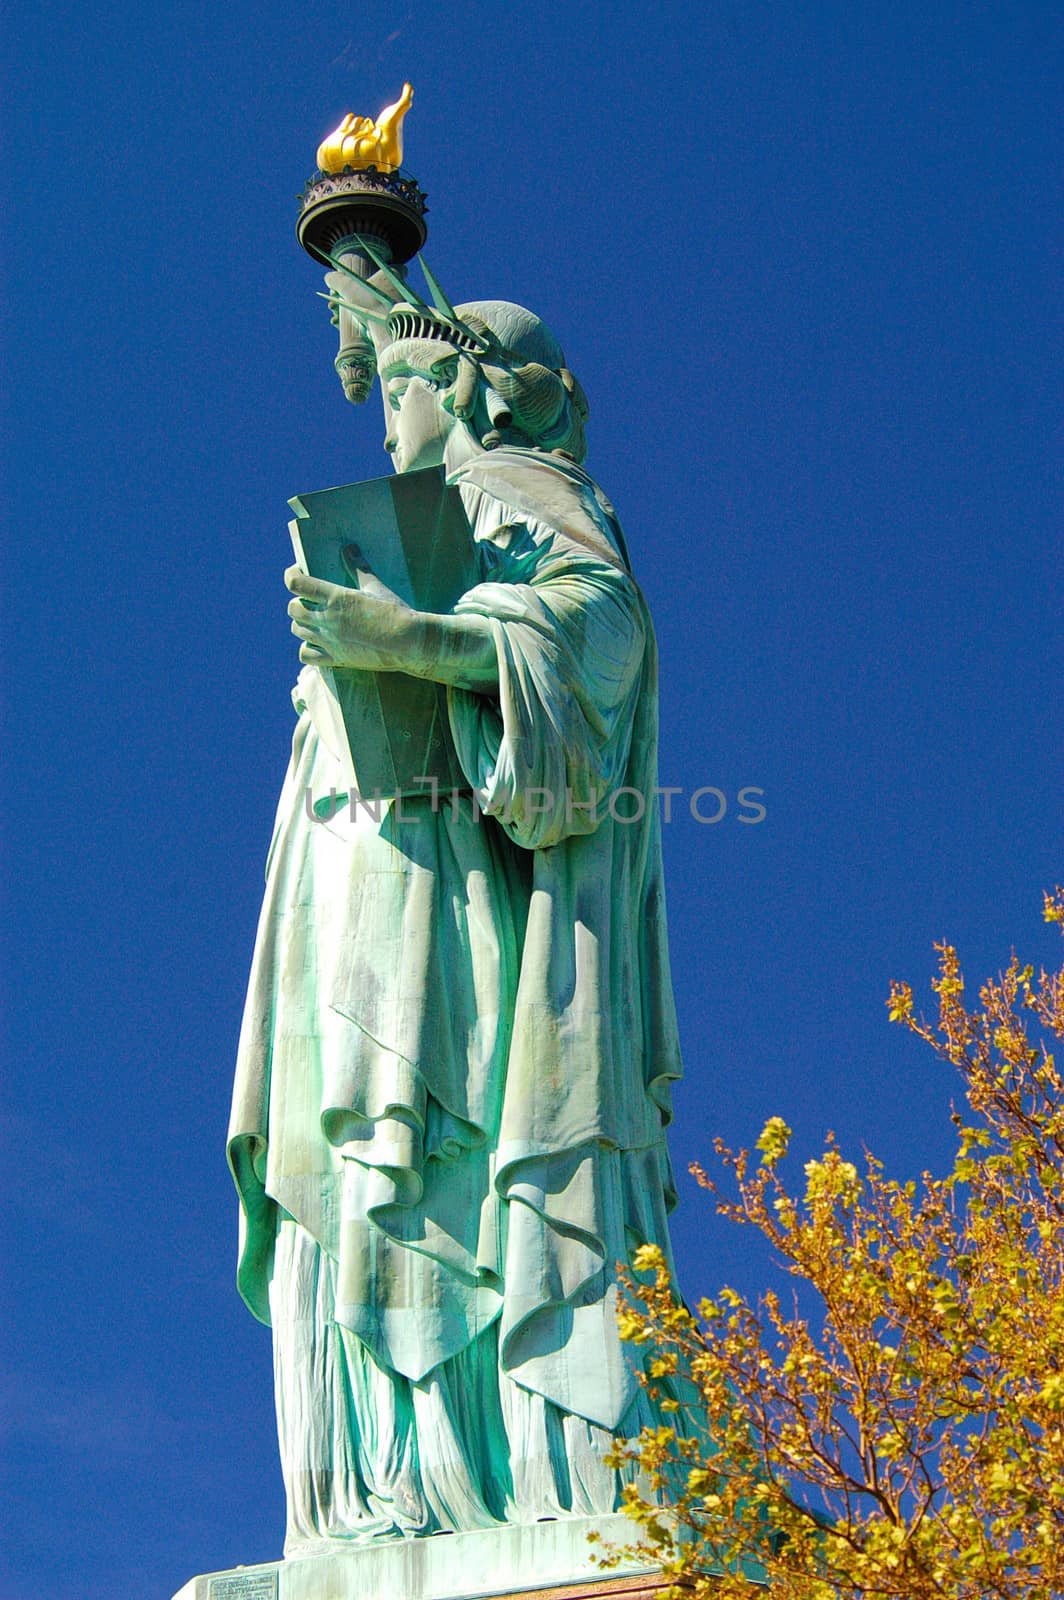 Statue of Liberty by cestes001